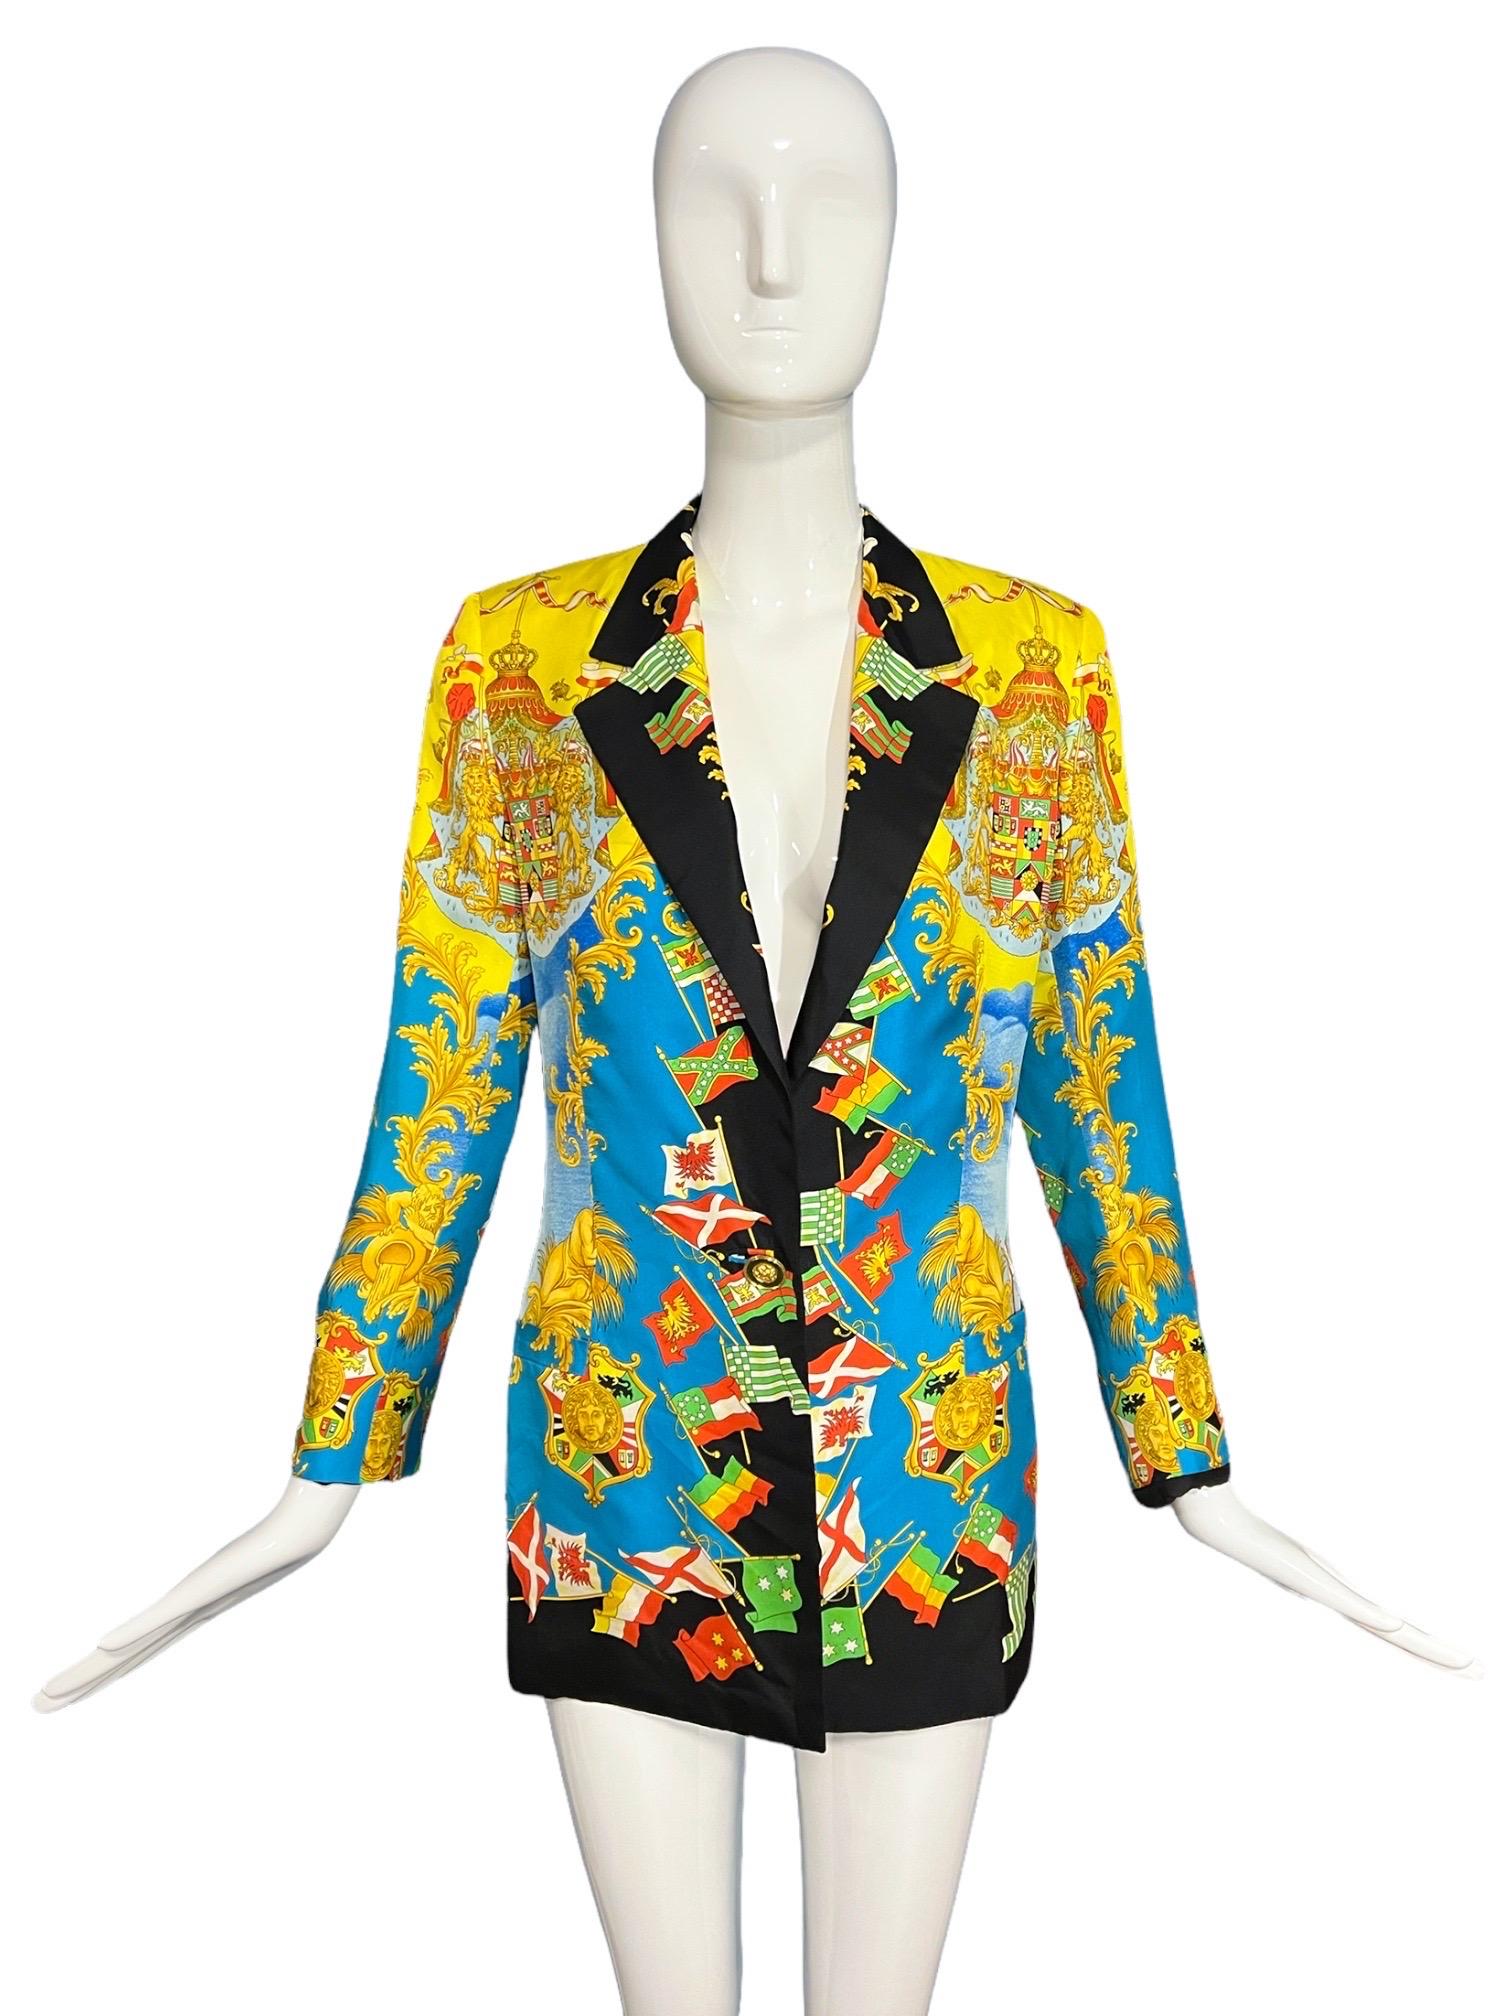 Gianni Versace Vintage 1993 Flag Silk Blazer themed around the Italian Explorer Amerigo Vespucci who helped discover America.

Featuring the Flags print from Spring Summer 1993 depicting Baroque multi colored flags, crowned lions, along with the